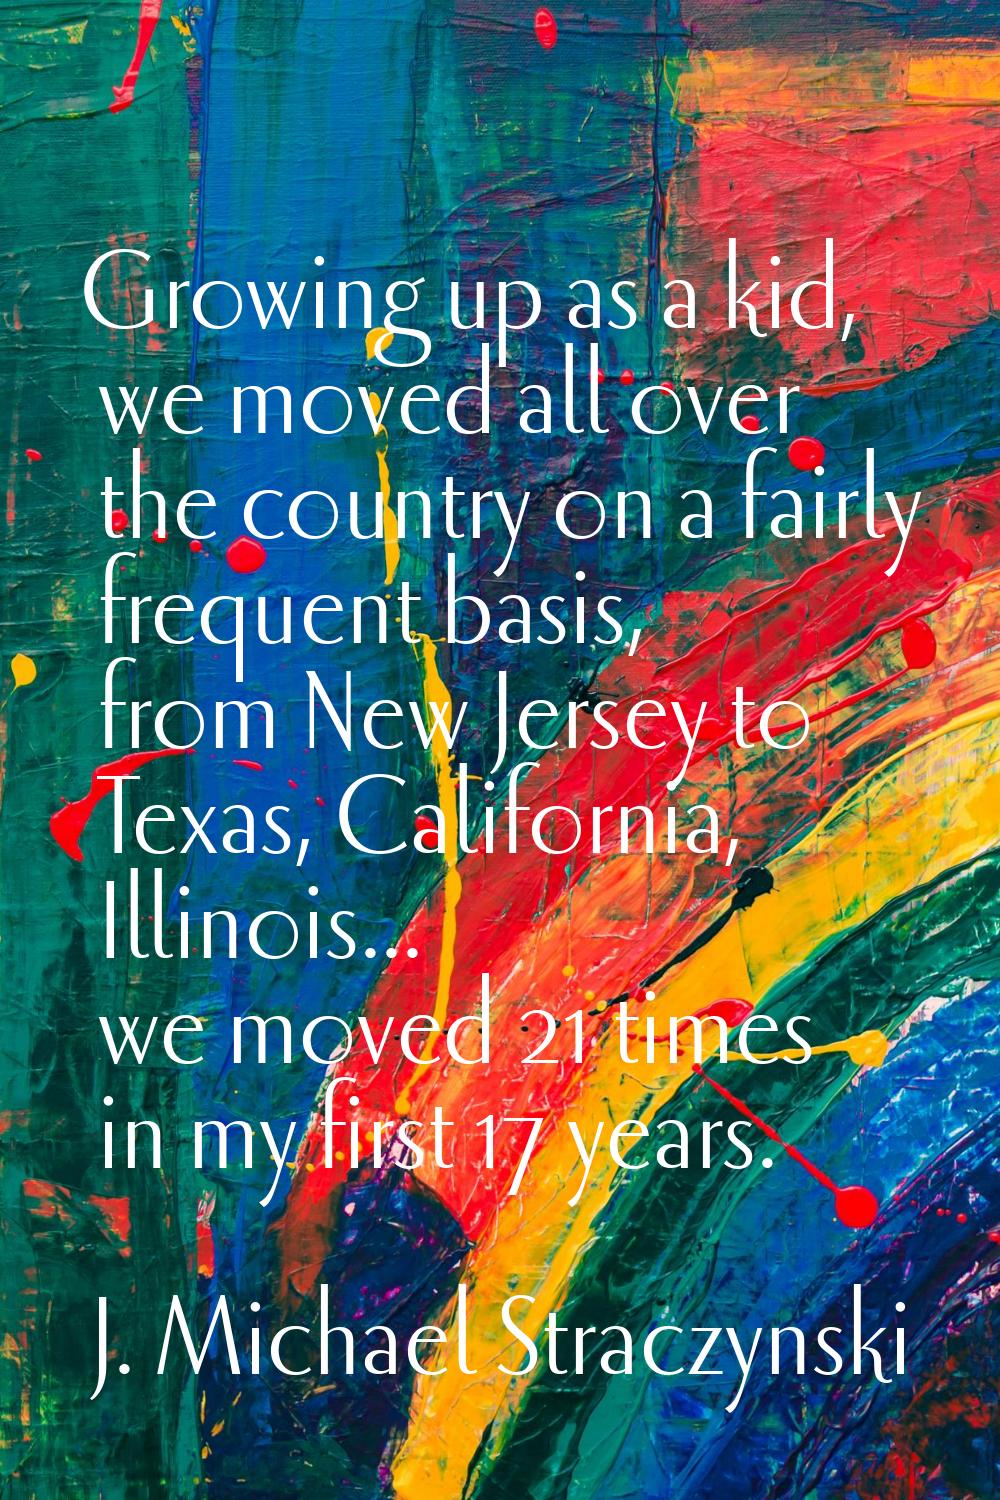 Growing up as a kid, we moved all over the country on a fairly frequent basis, from New Jersey to T